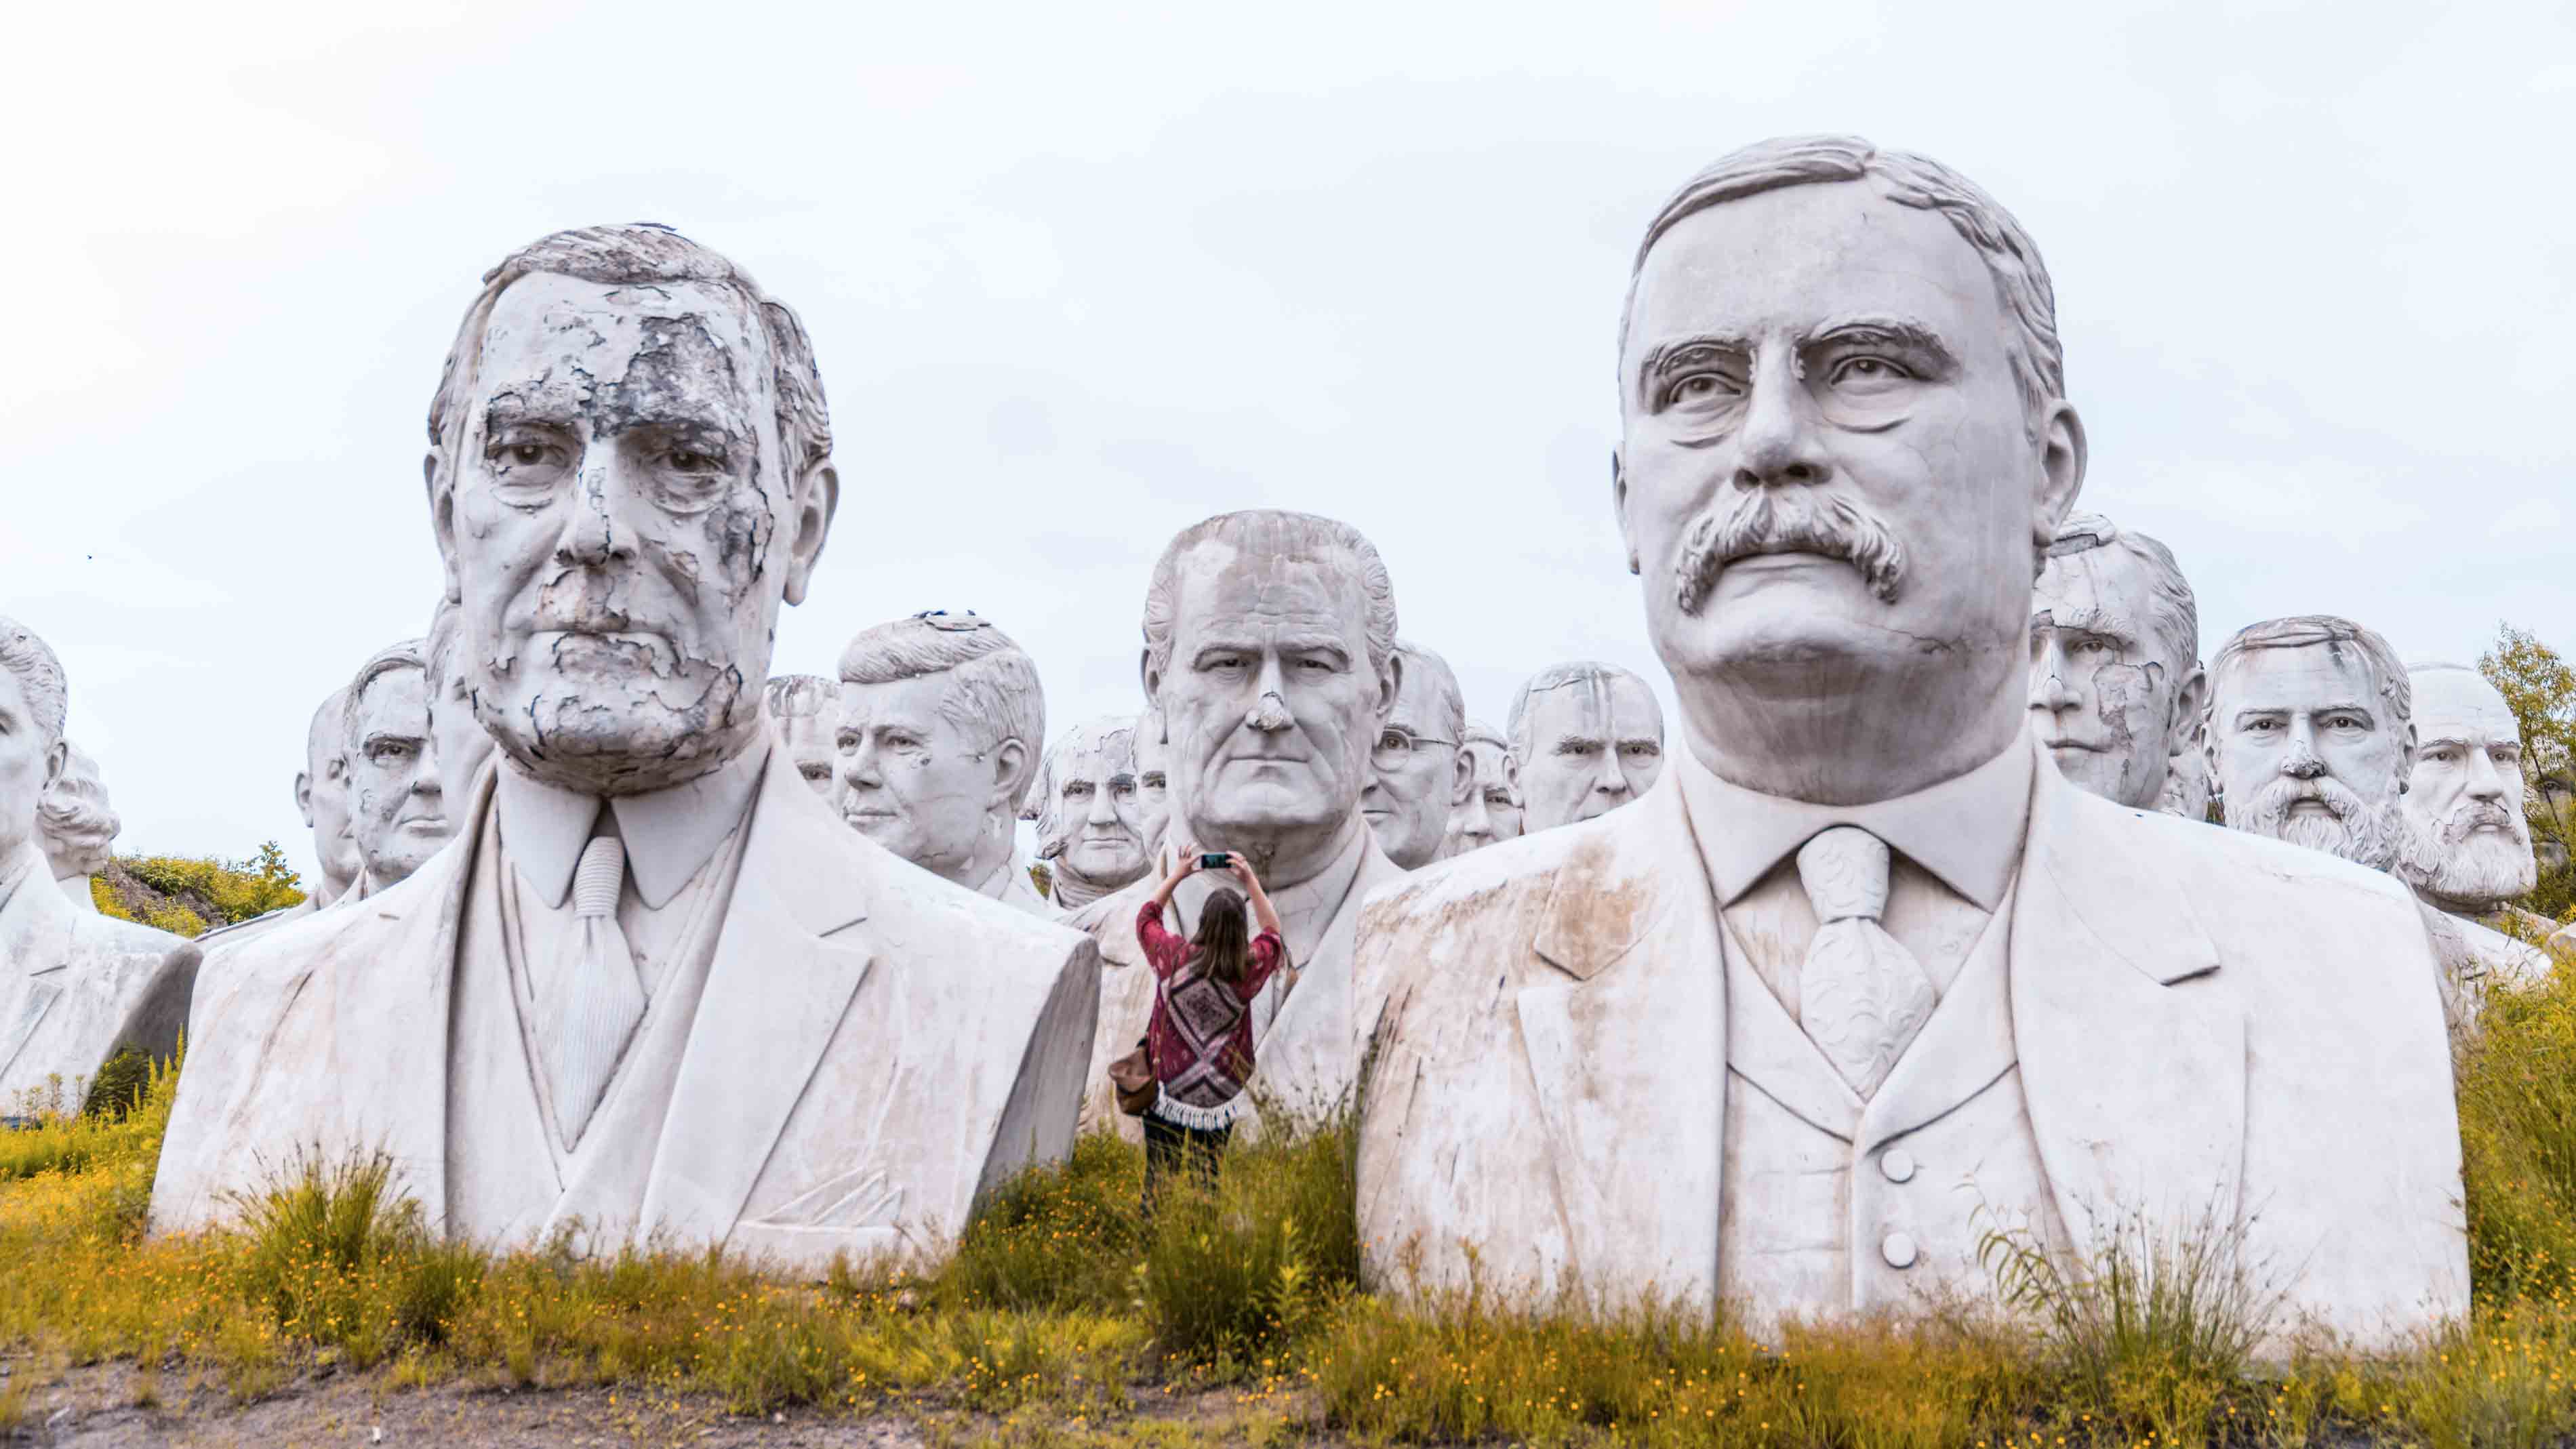 How 43 president heads ended up abandoned on a Virginia farm